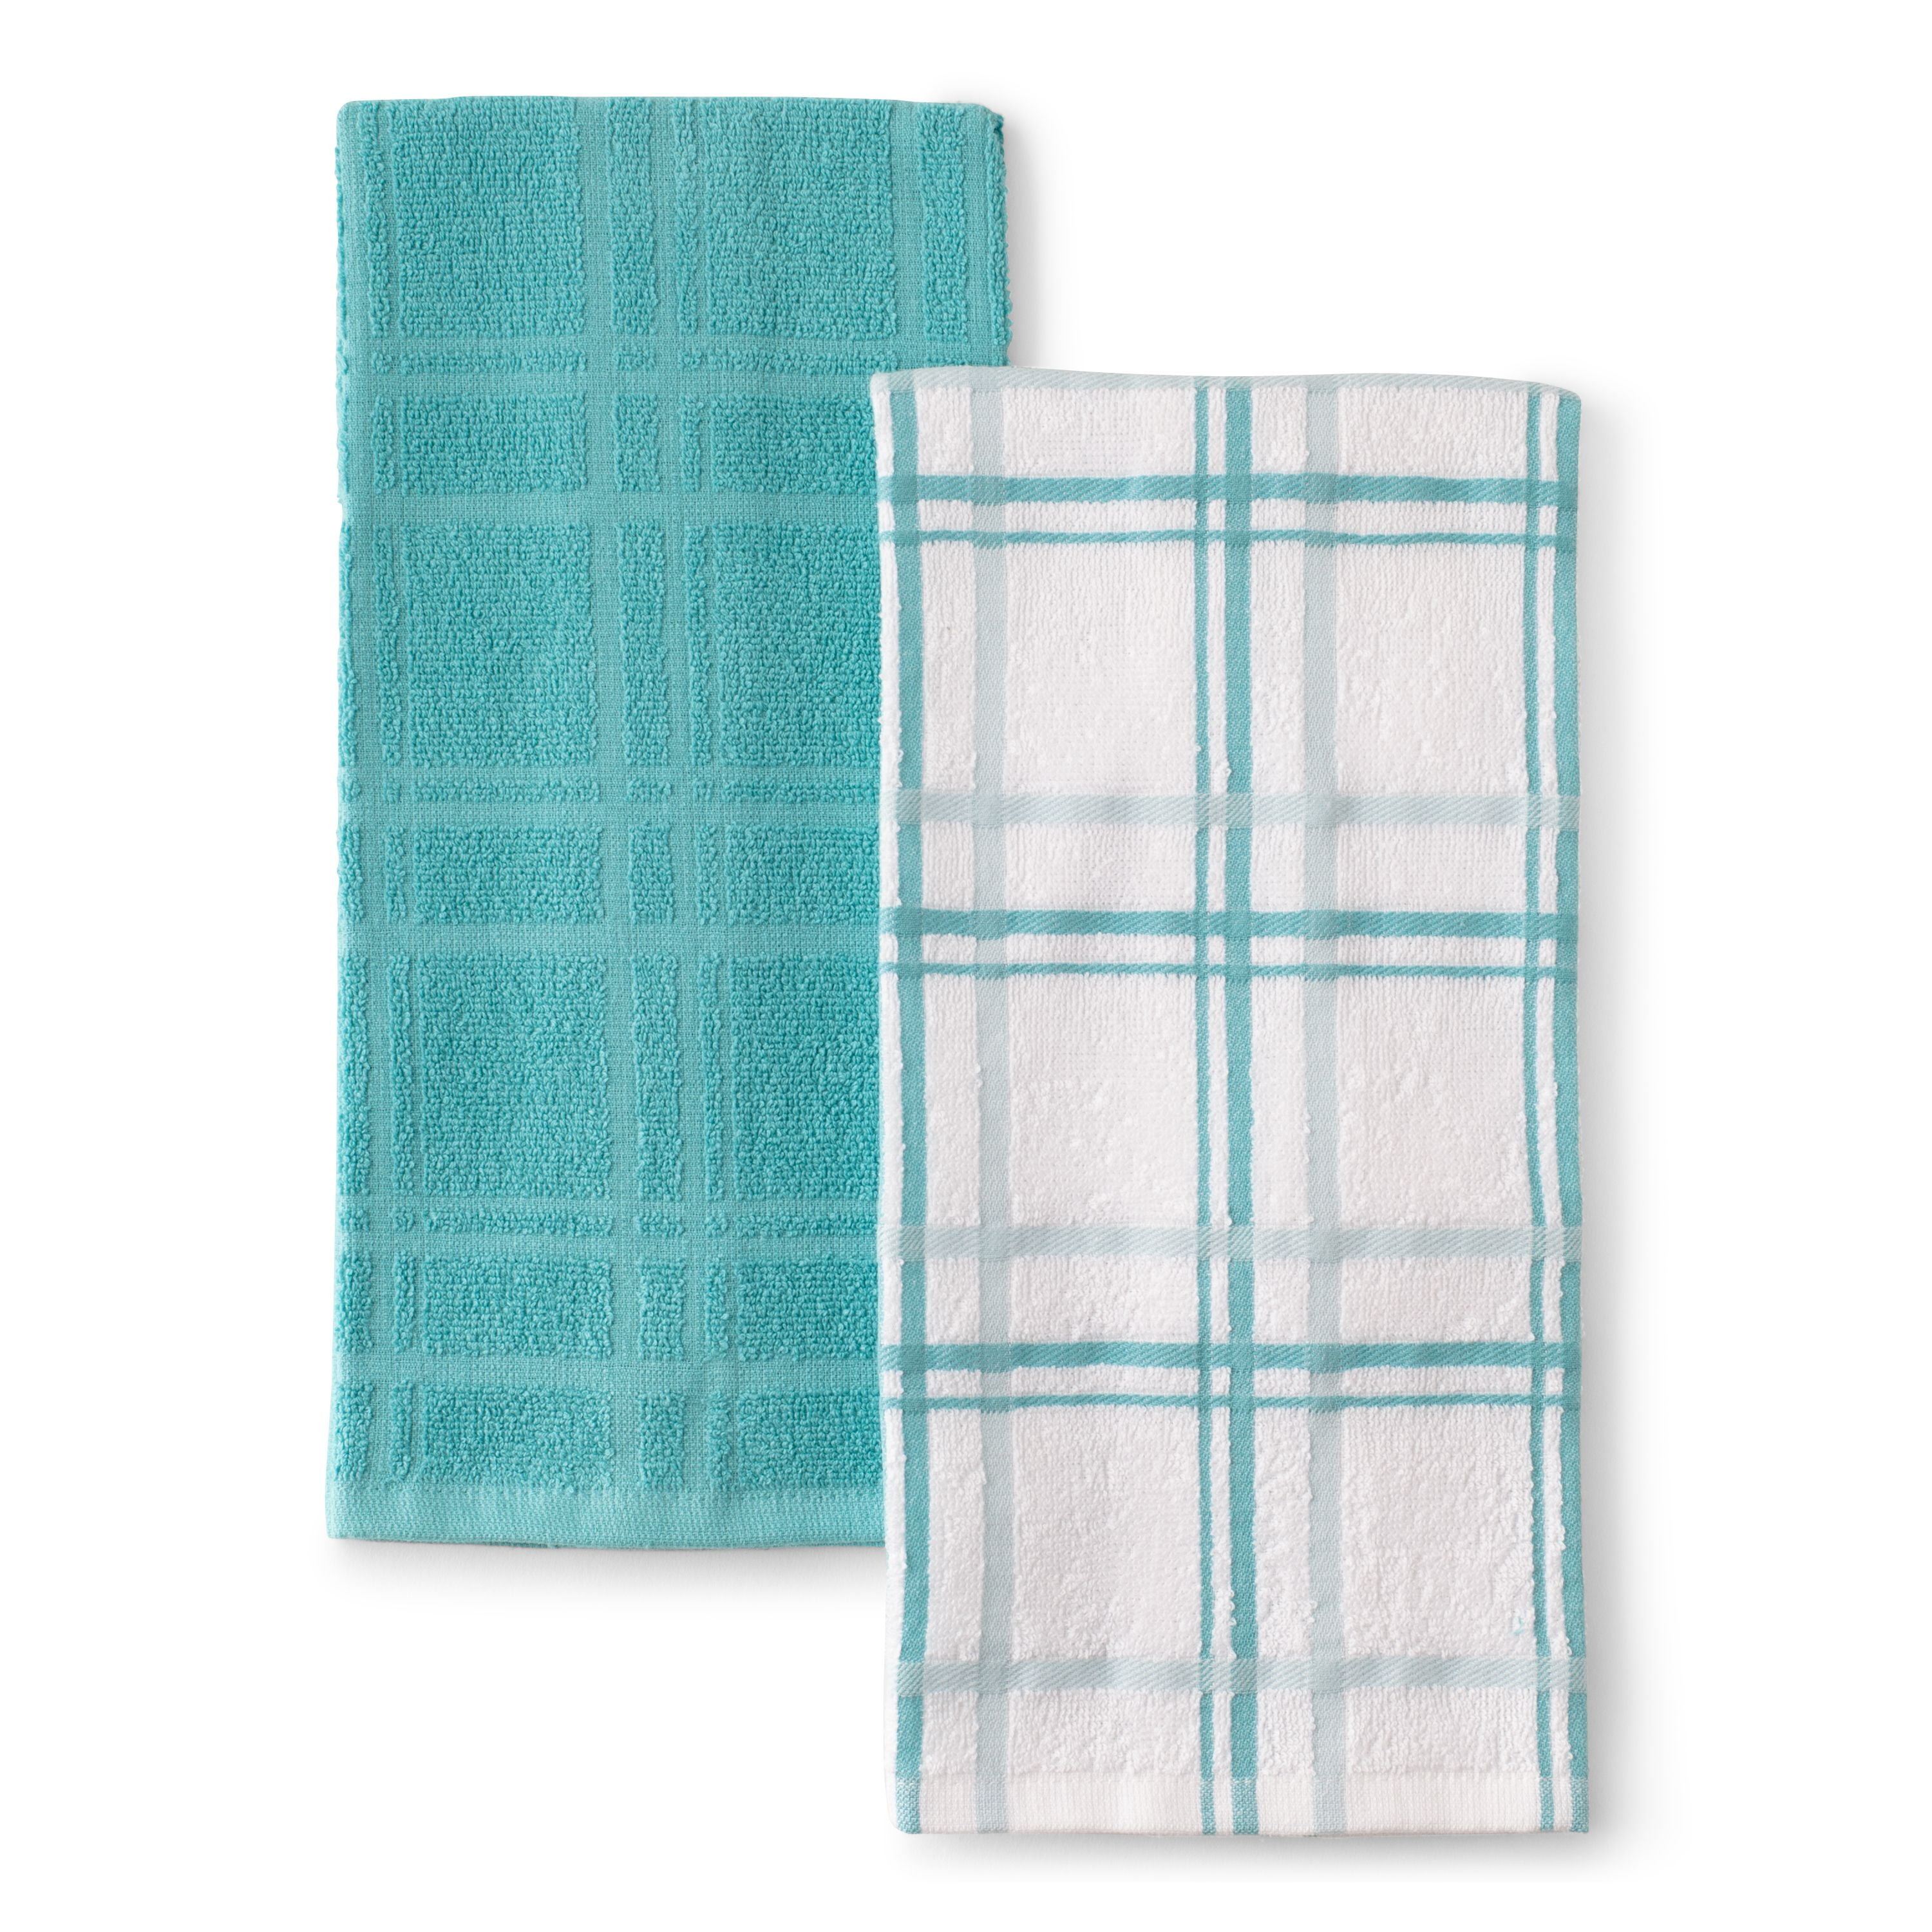 Set of 5 Teal Dish Cloths and Dish Towels 28 x 18 - Bed Bath & Beyond -  28535431